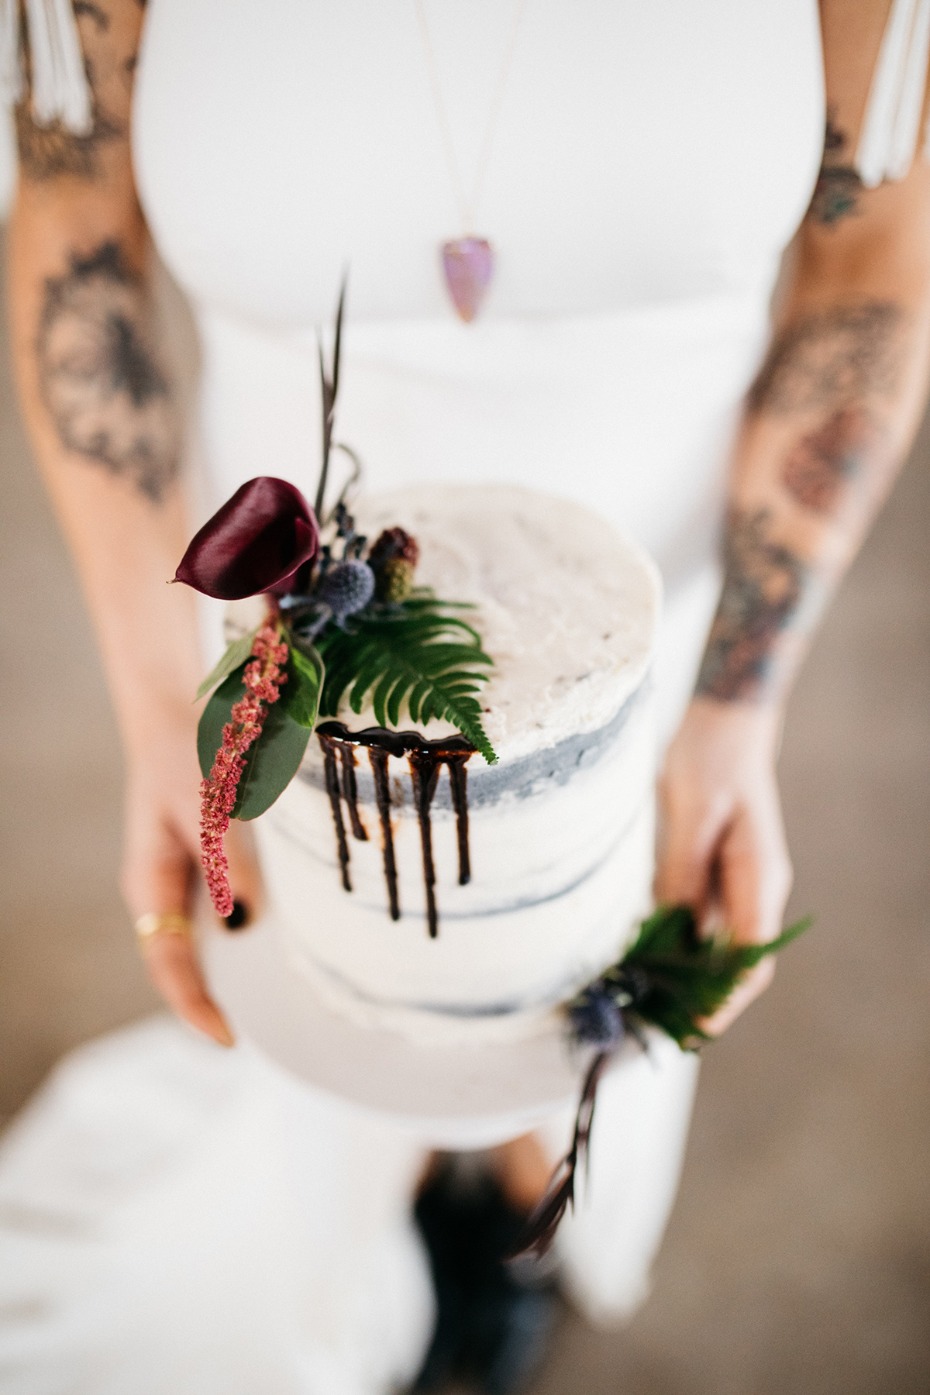 Drip naked cake for two